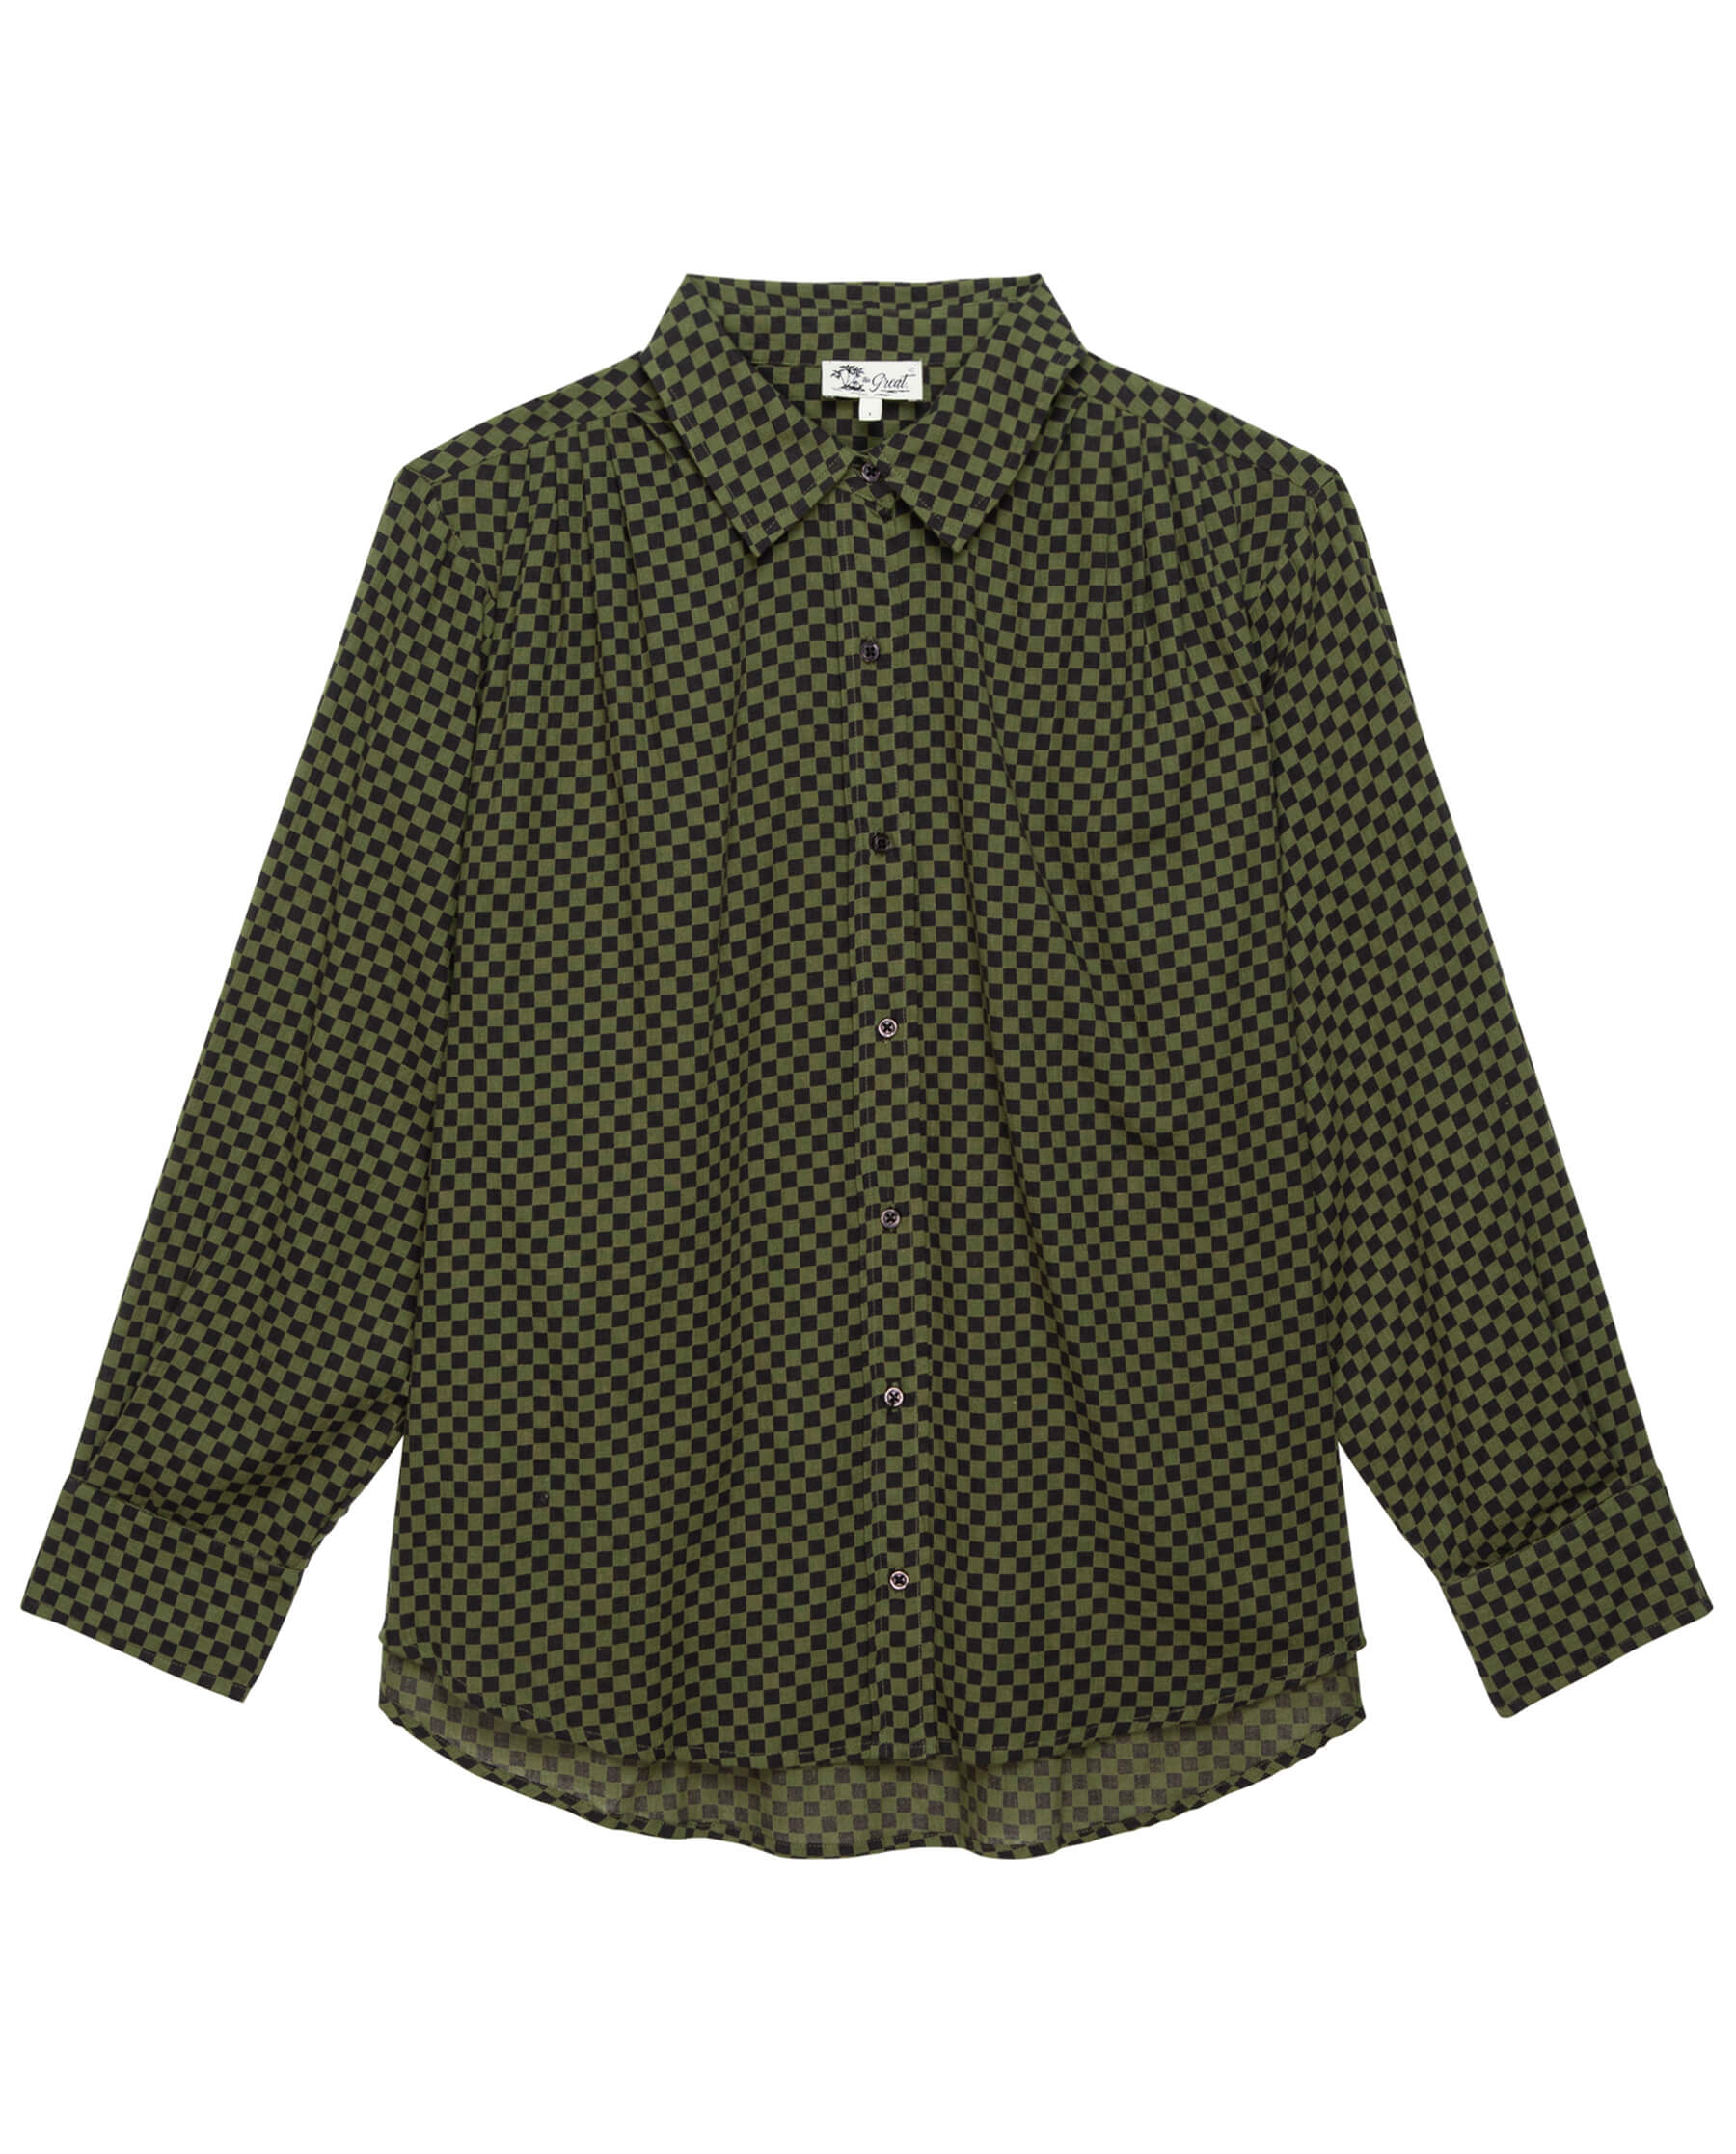 The Cove Shirt. -- Dark Army Check COVER-UP SHIRTS THE GREAT. SP24 SWIM